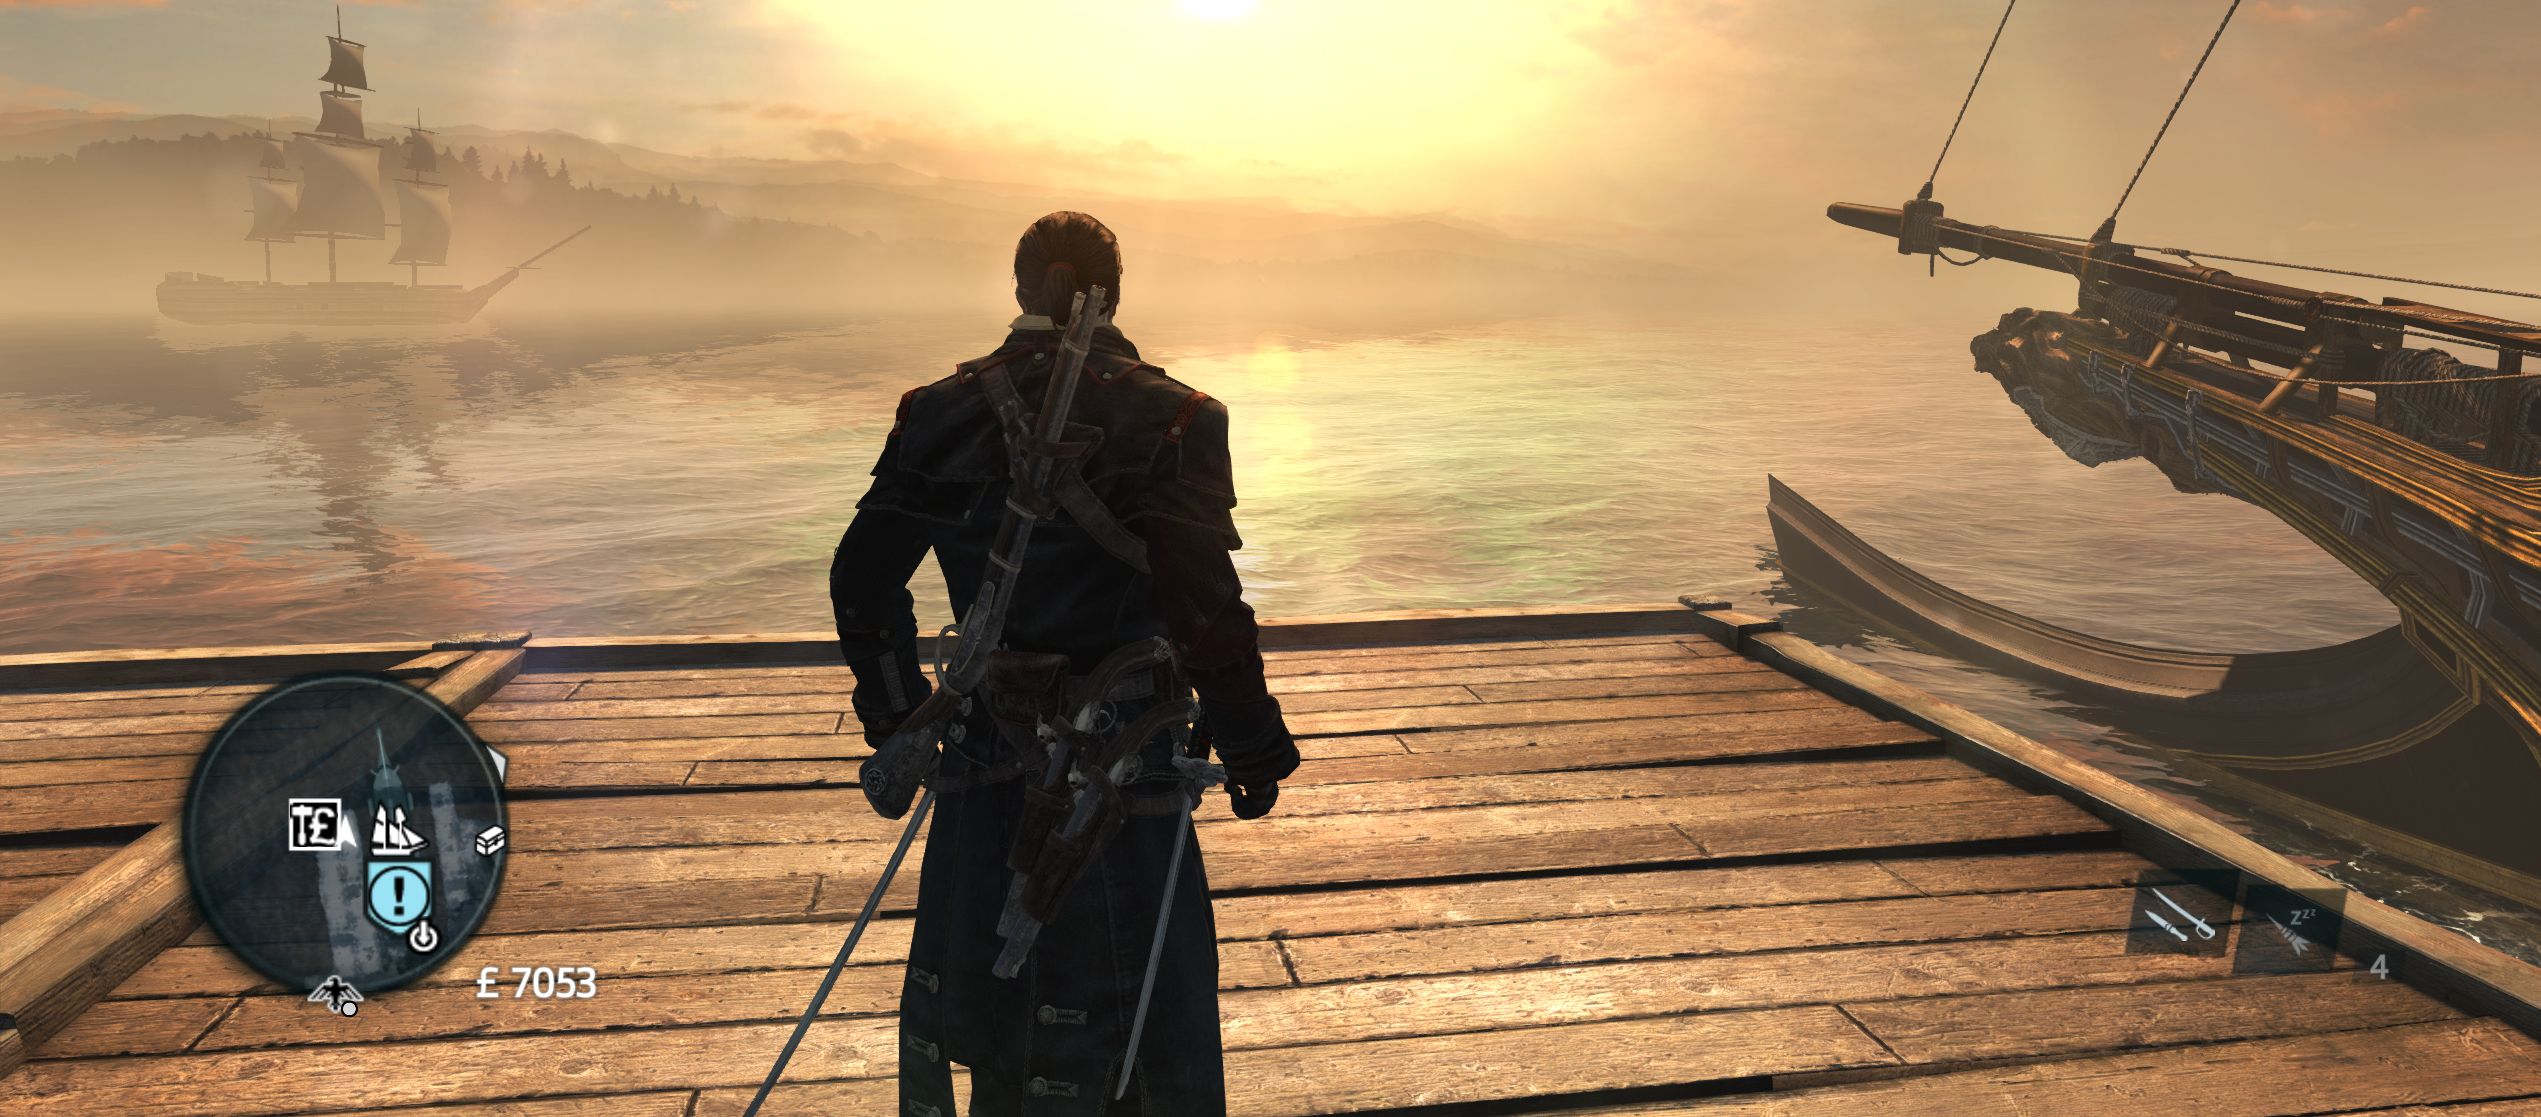 Assassin's Creed Rogue Review ⚡️ Is AC Rogue Good?